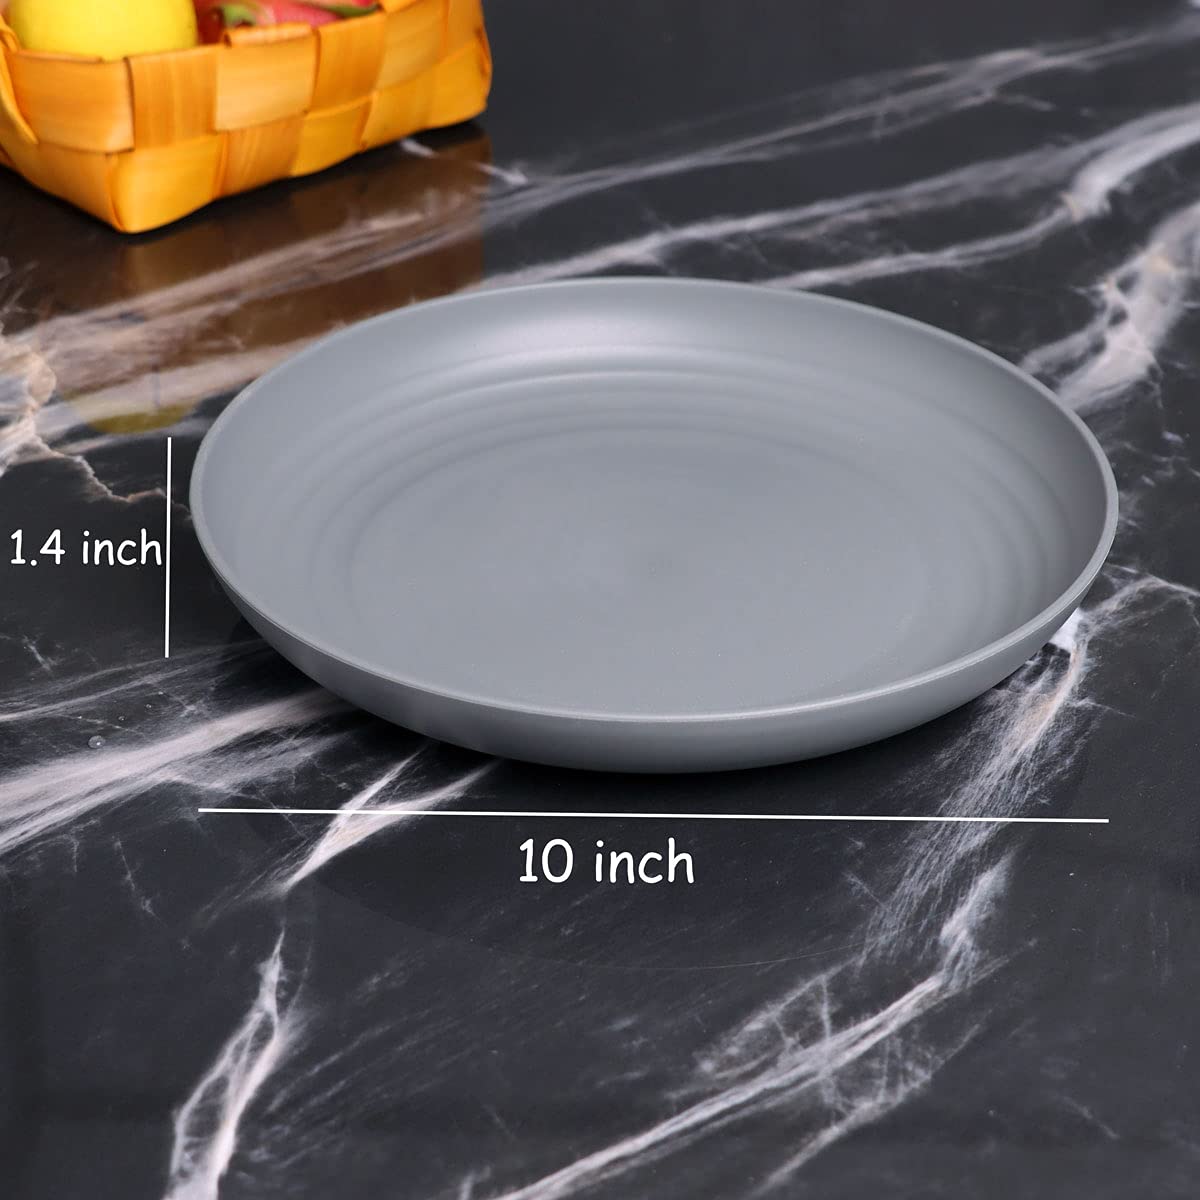 GENLGE 10 Inch Plastic Plates Reusable, Wheat Straw Plates Set of 4 Microwave Safe Kitchen Plates, Unbreakable Camping Outdoor Plates, Eco Friendly Dinner Plates